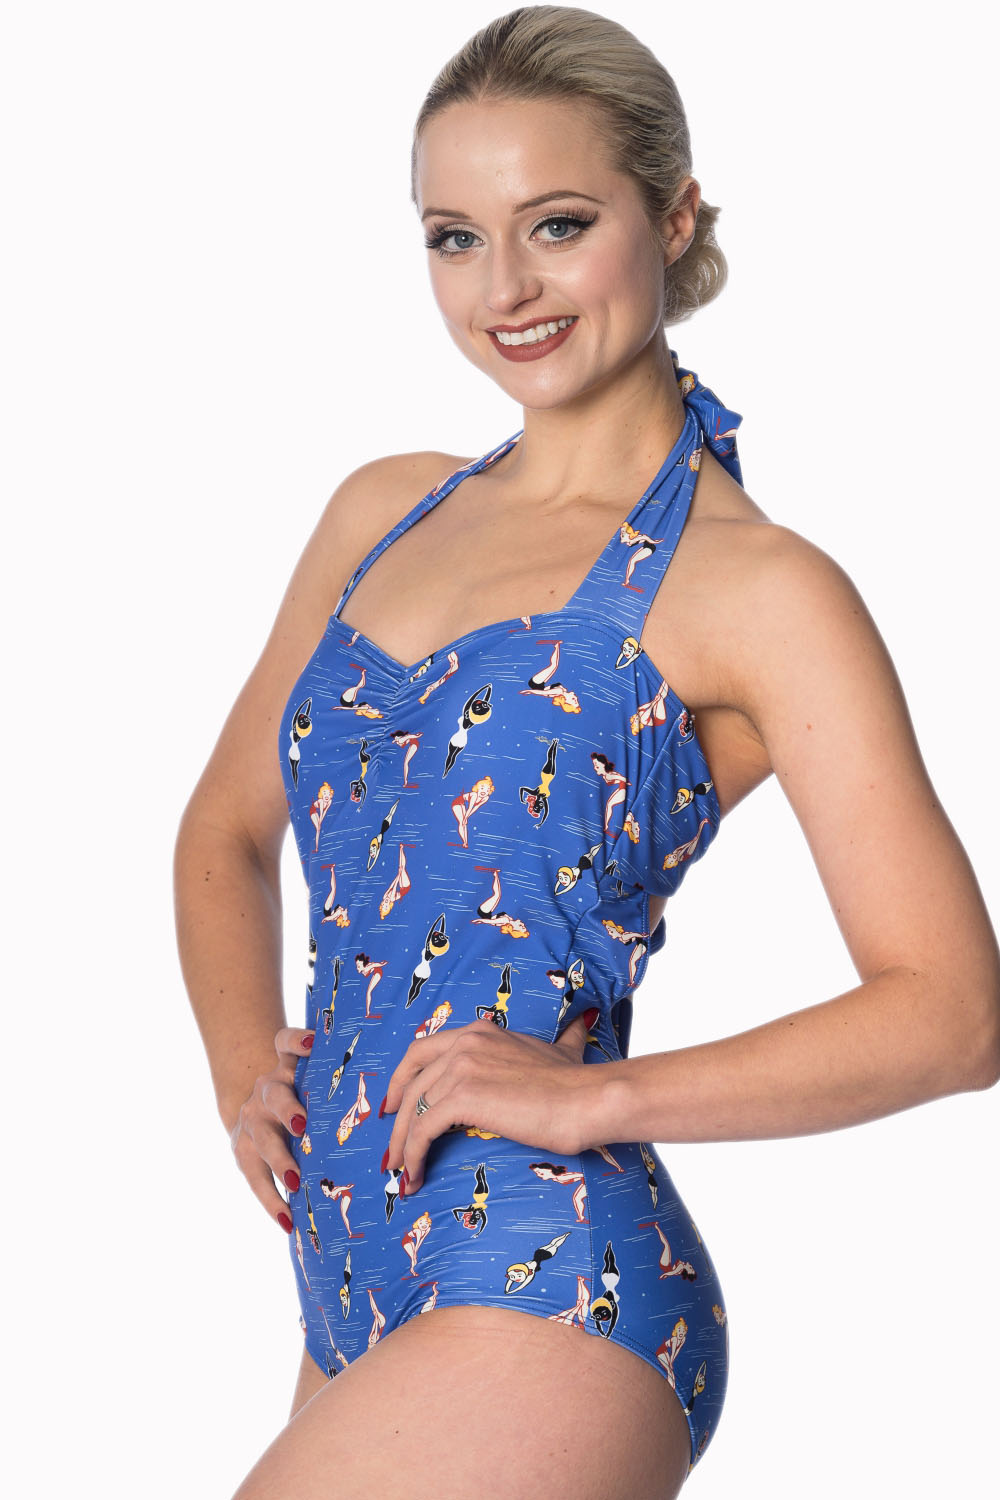 Dive In Retro One Piece Swimsuit by Banned Clothing - SALE XS & S only